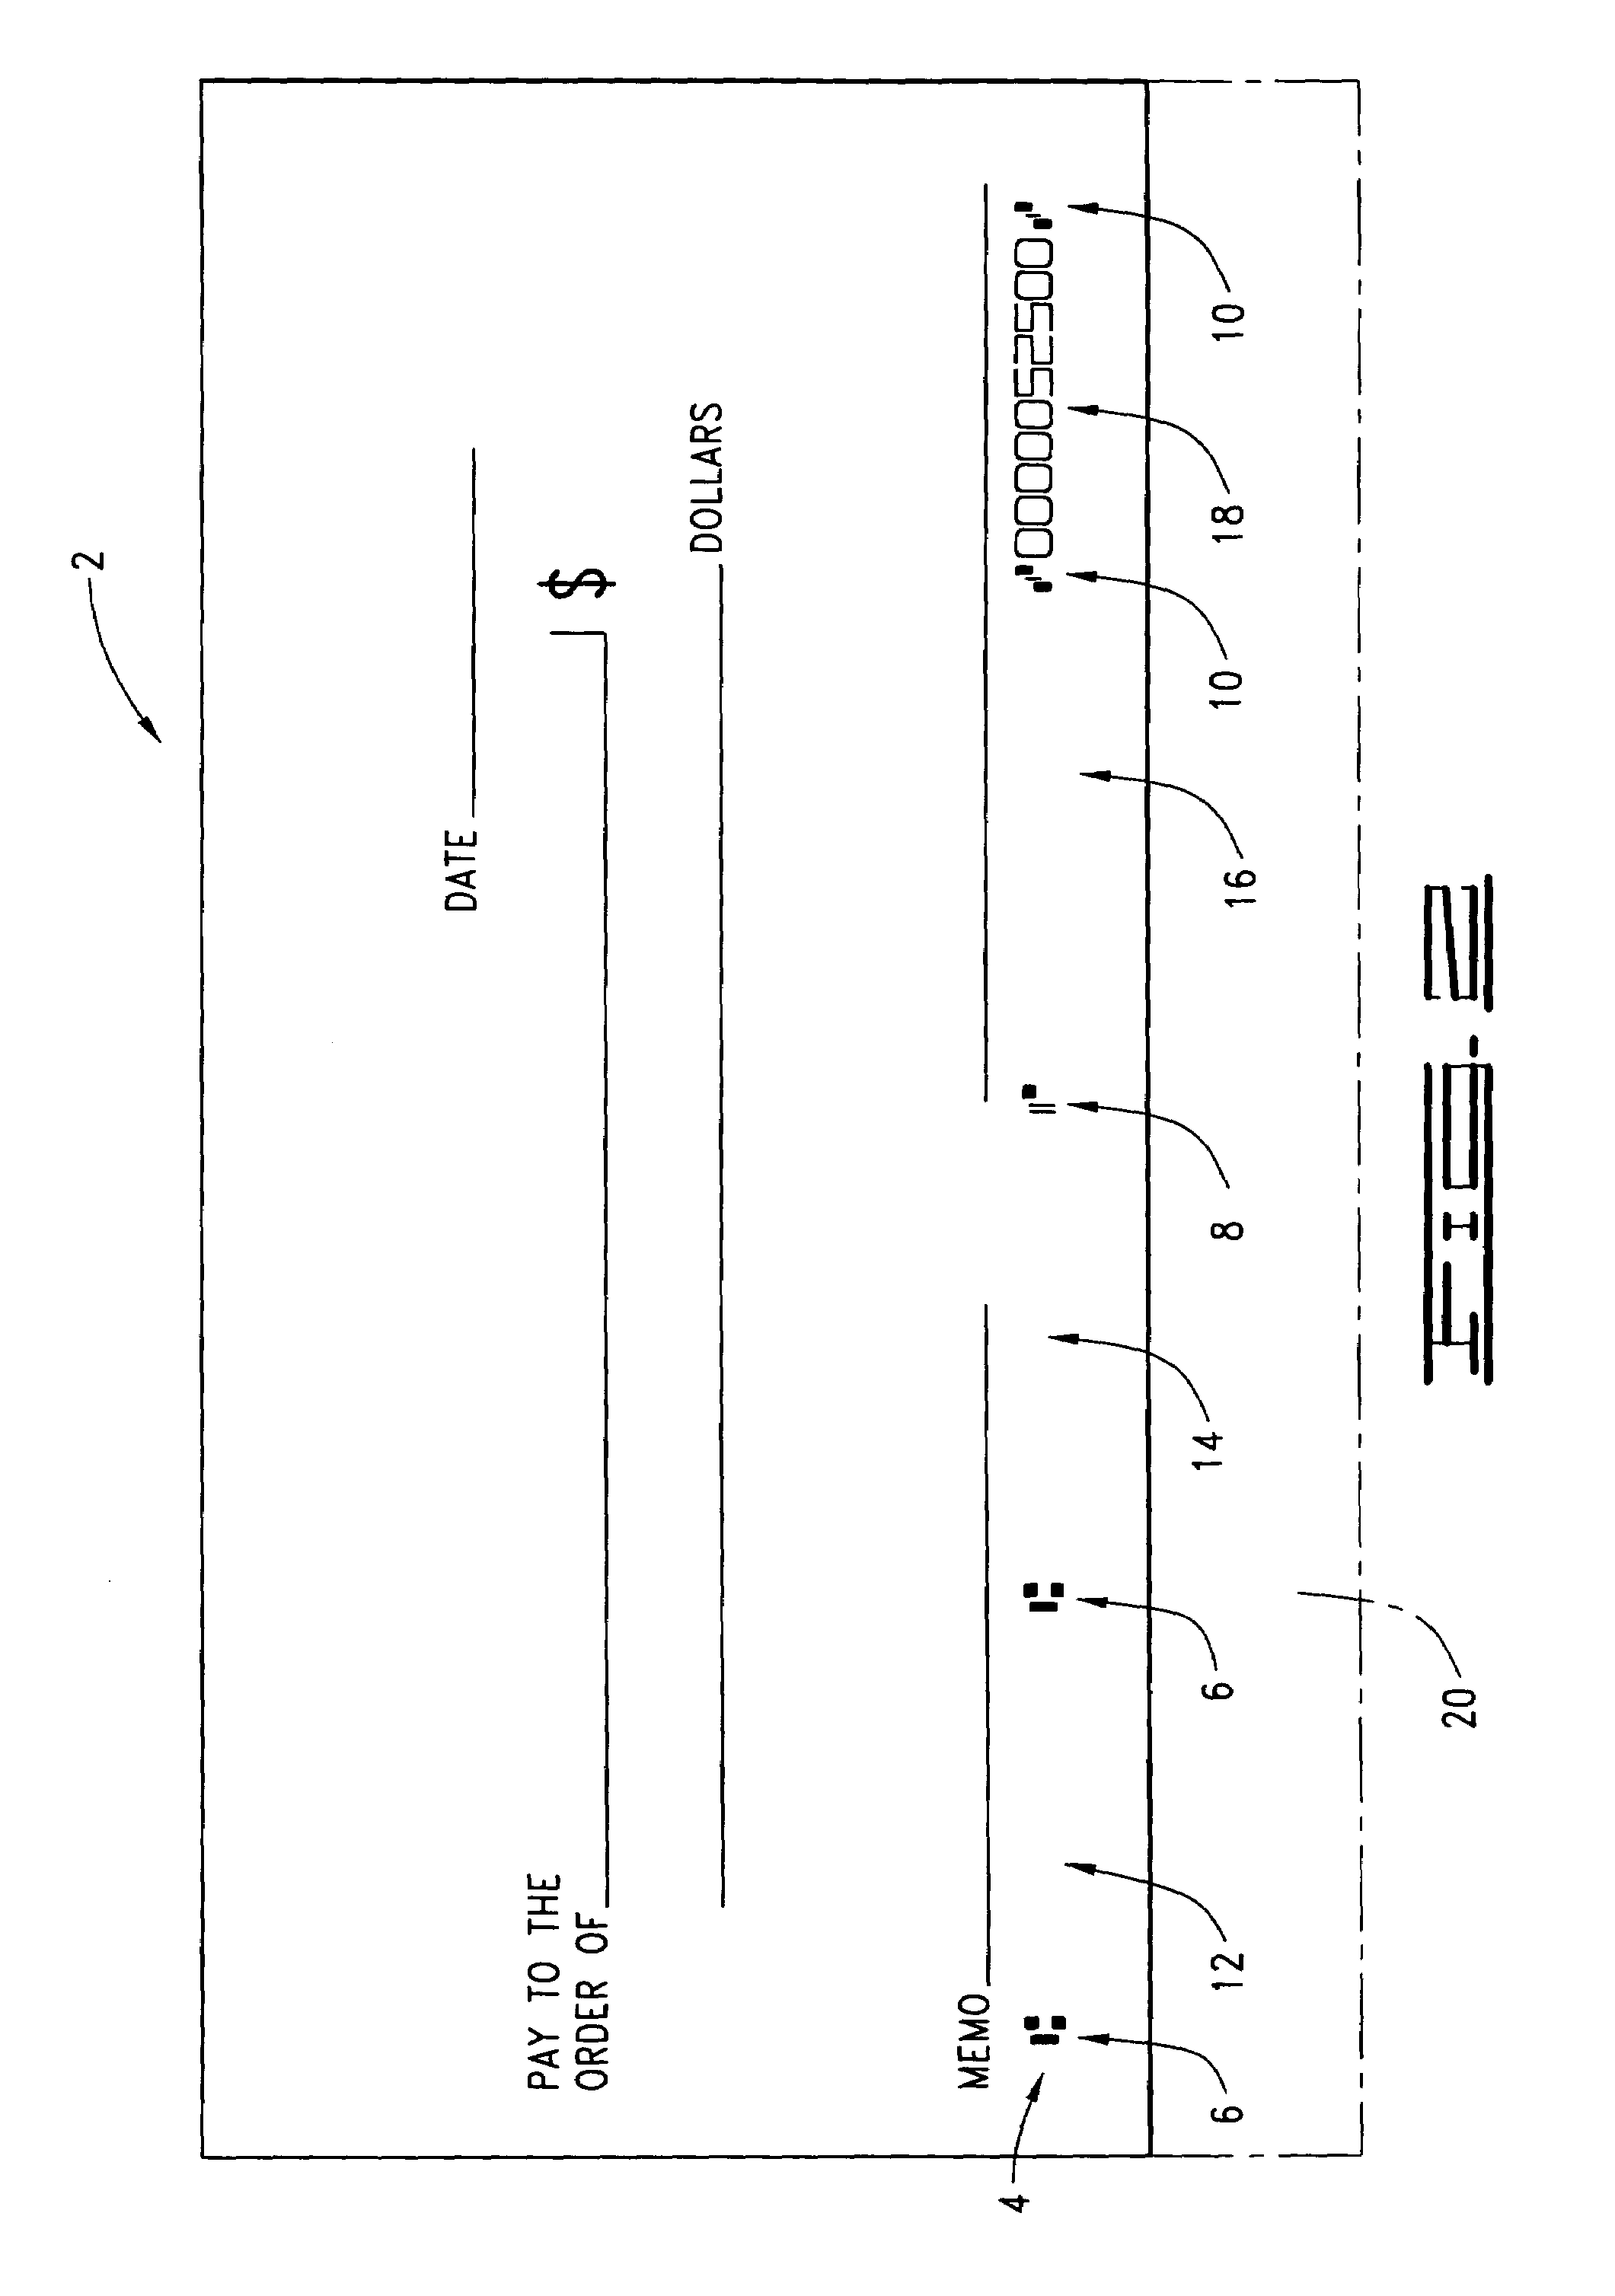 Character recognition, including method and system for processing checks with invalidated MICR lines